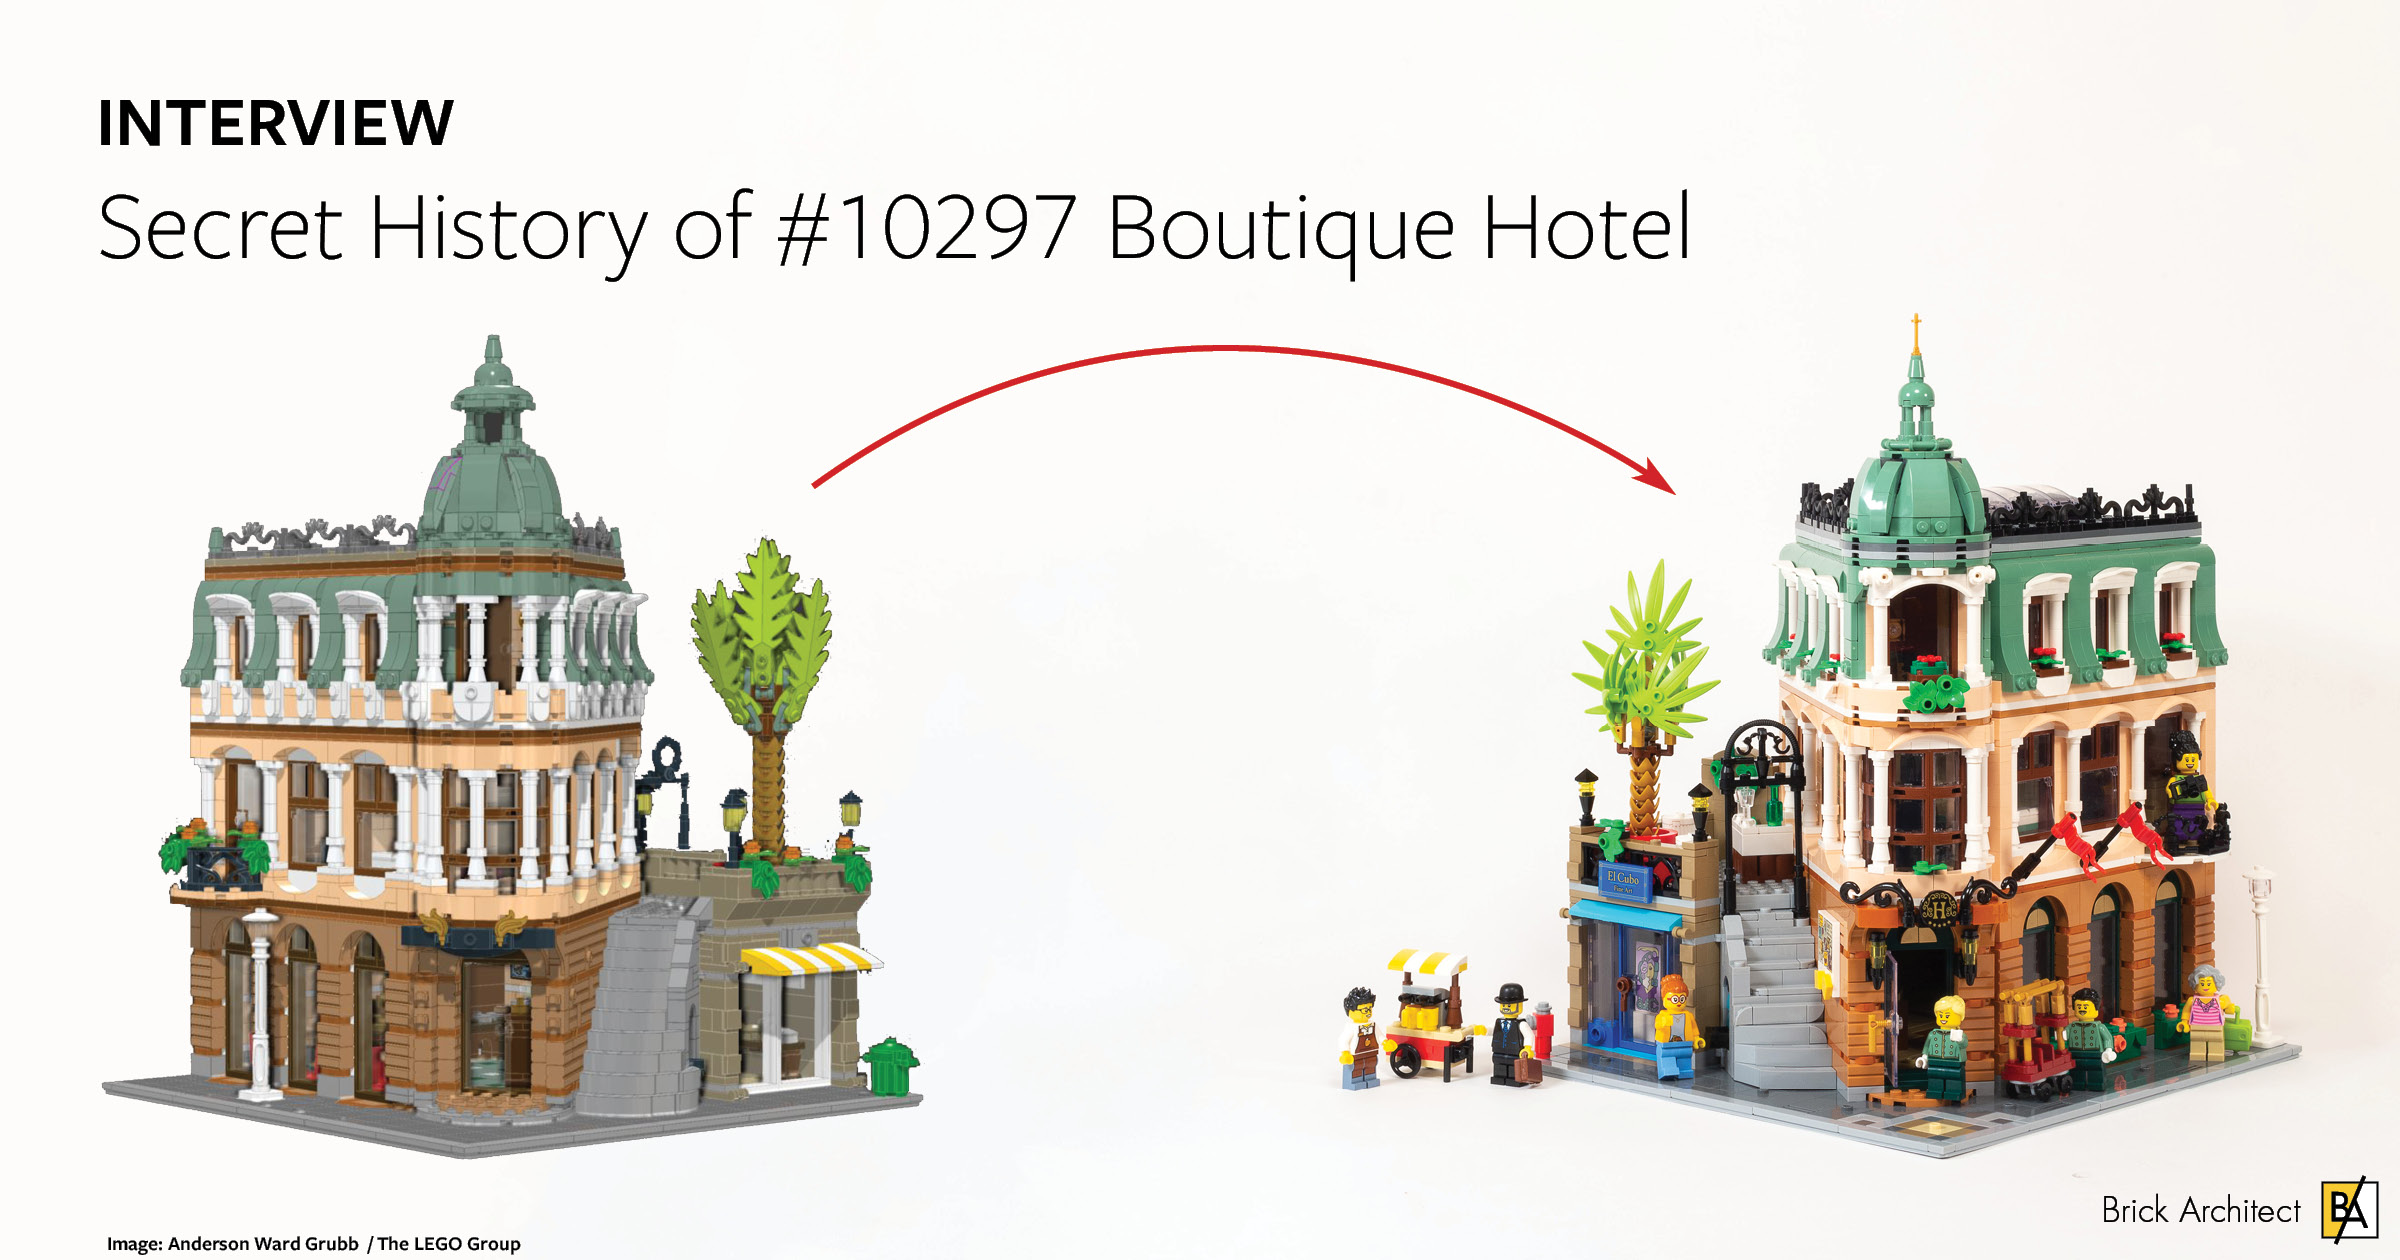 Interview: Secret history of #10297 Boutique Hotel with Anderson